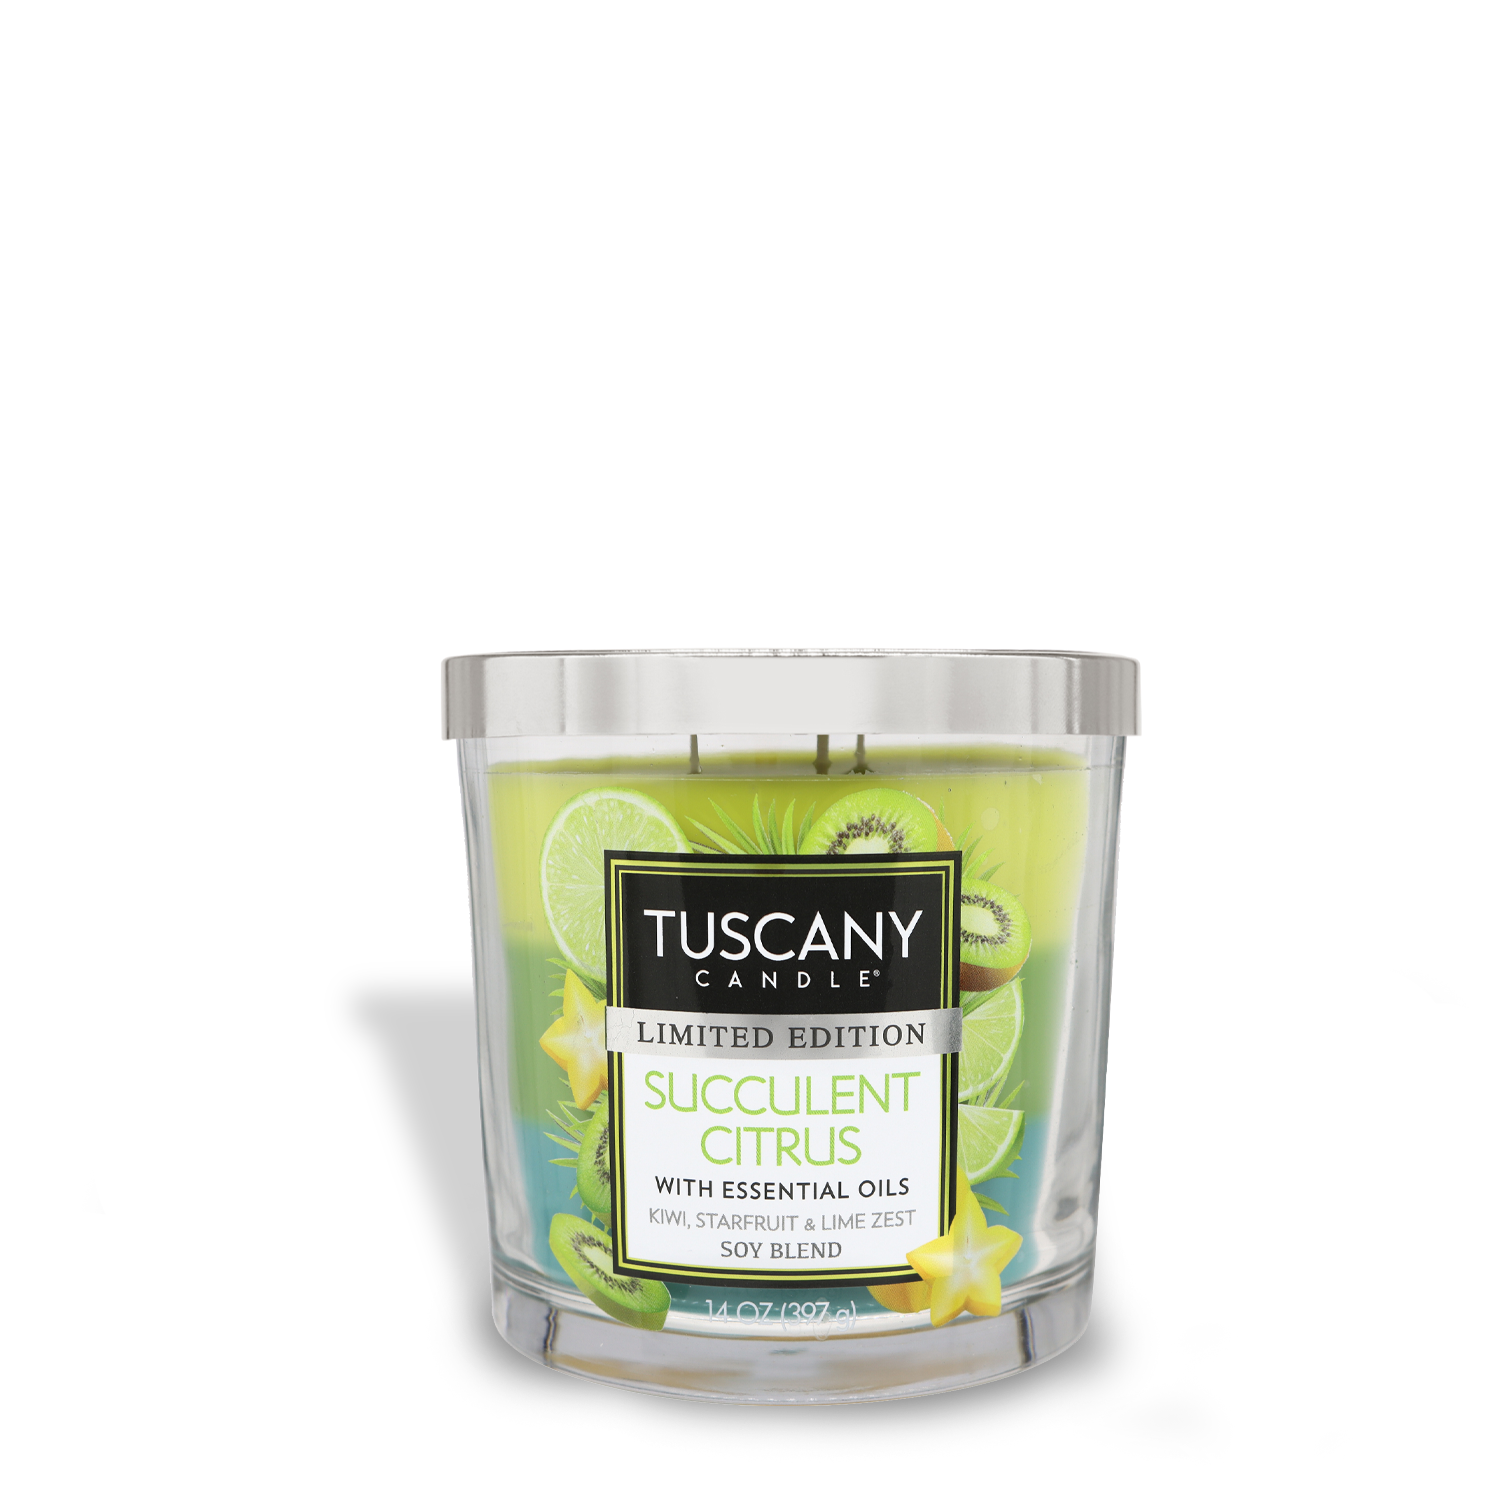 A Tuscany Candle® SEASONAL limited edition "Succulent Citrus" scented candle with essential oils, featuring a blend of kiwi, strawberry, and lime zest.